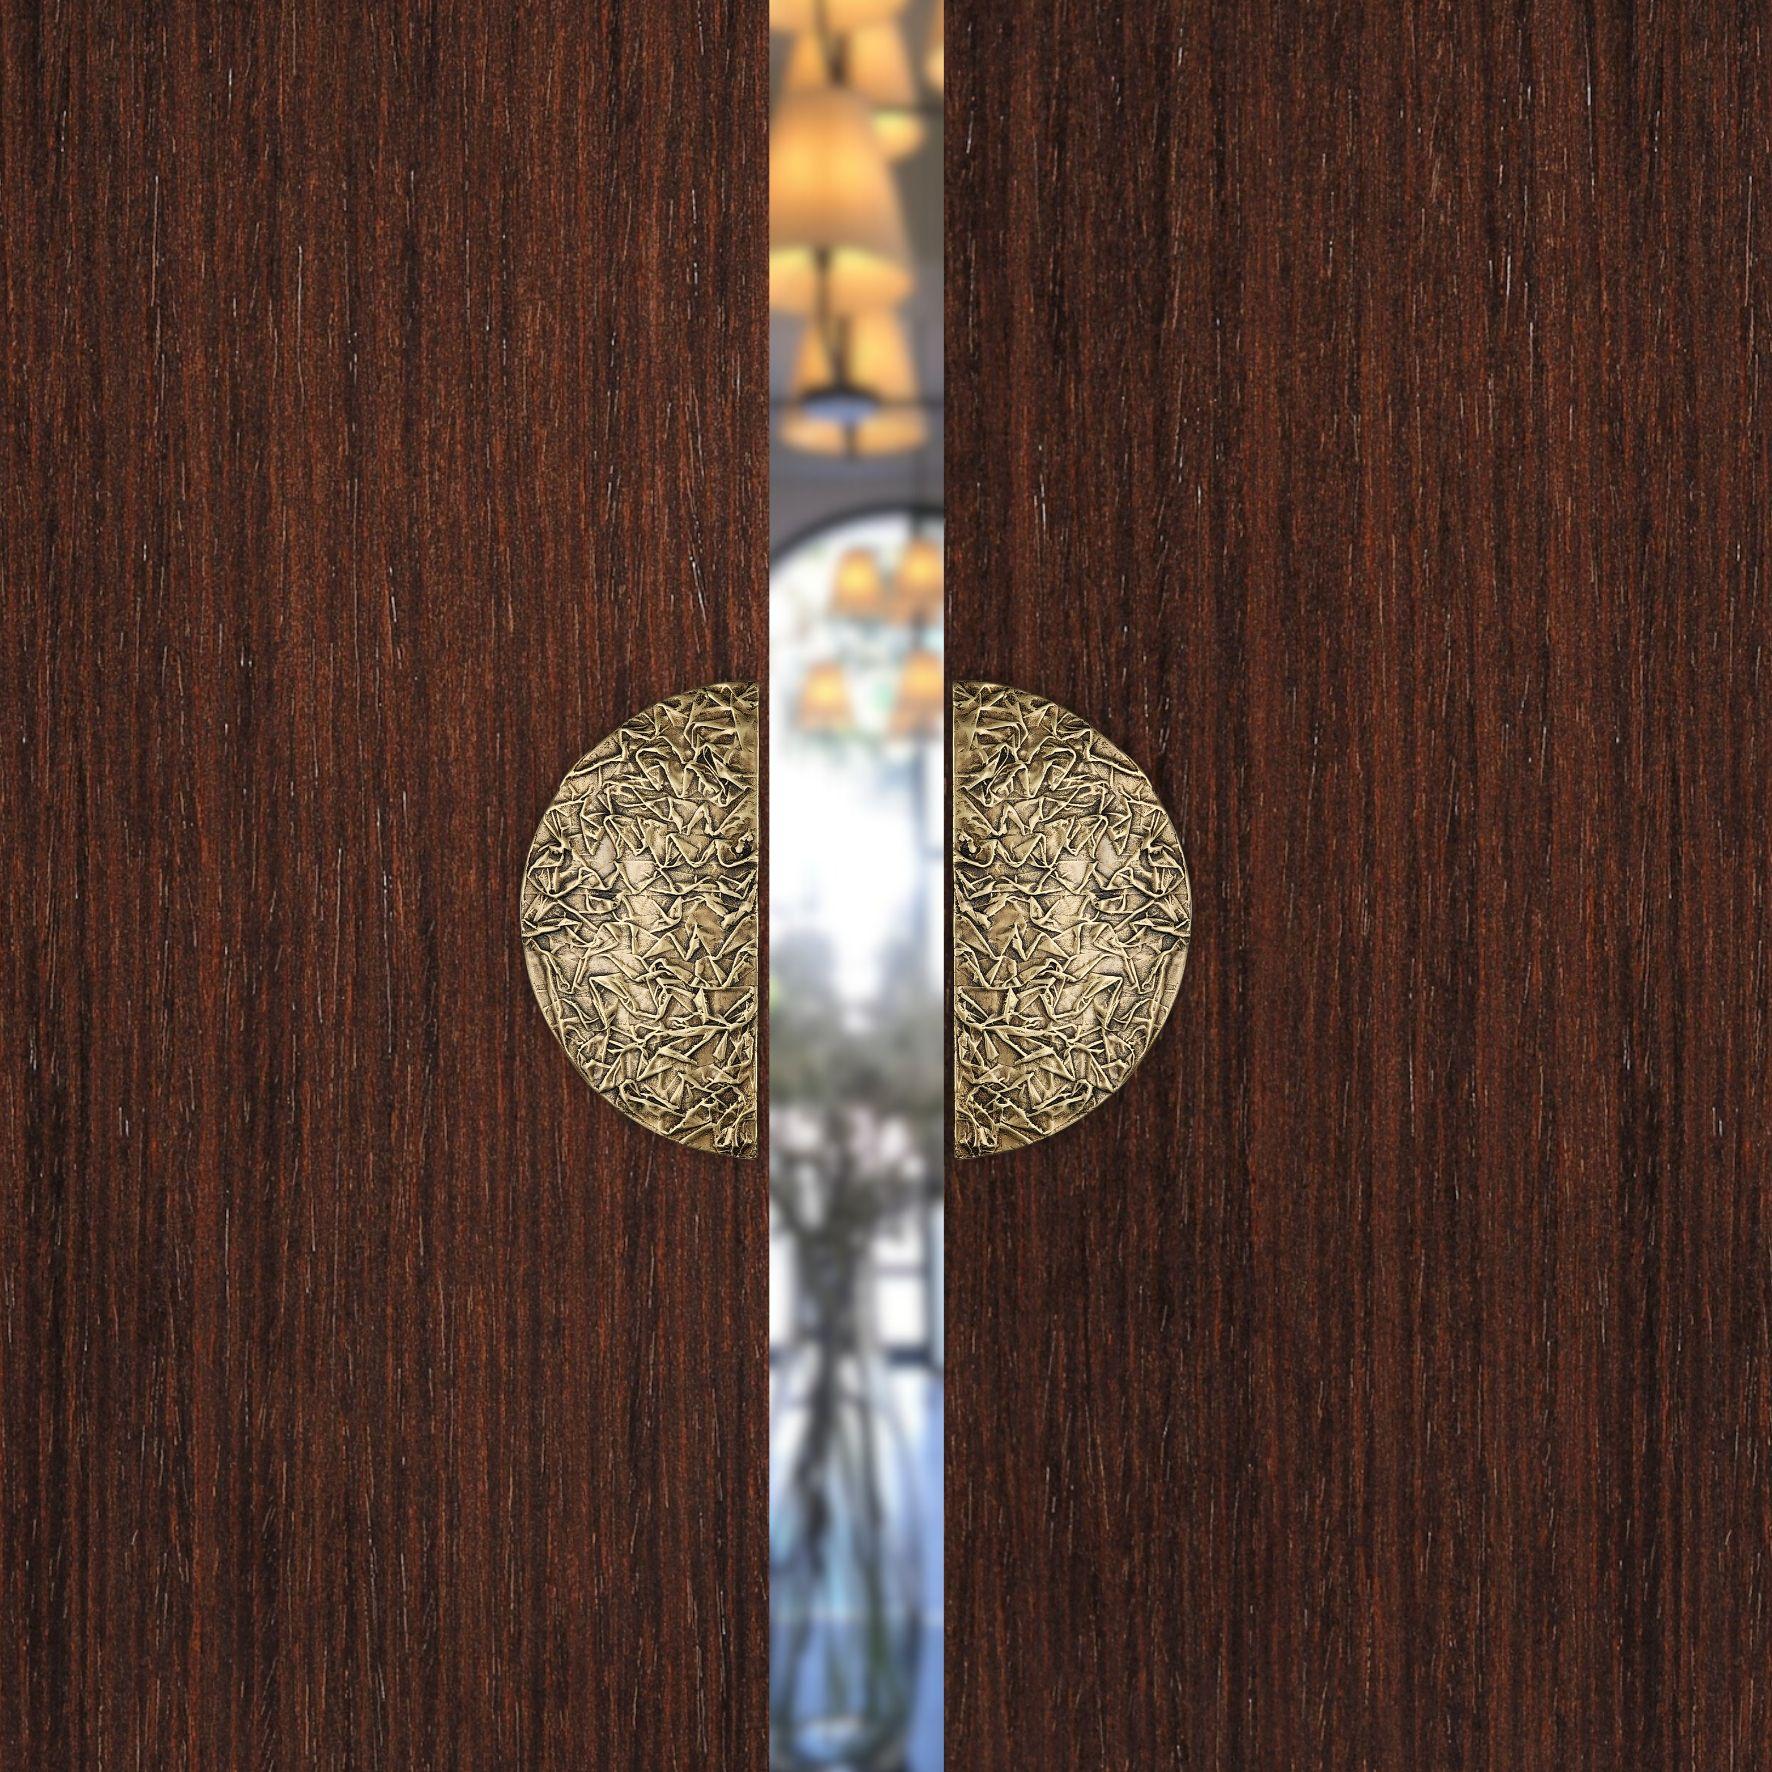 A tribute to nature, infinite source of patterns with organic elements. Solid brass pull handle made in our workshops.
